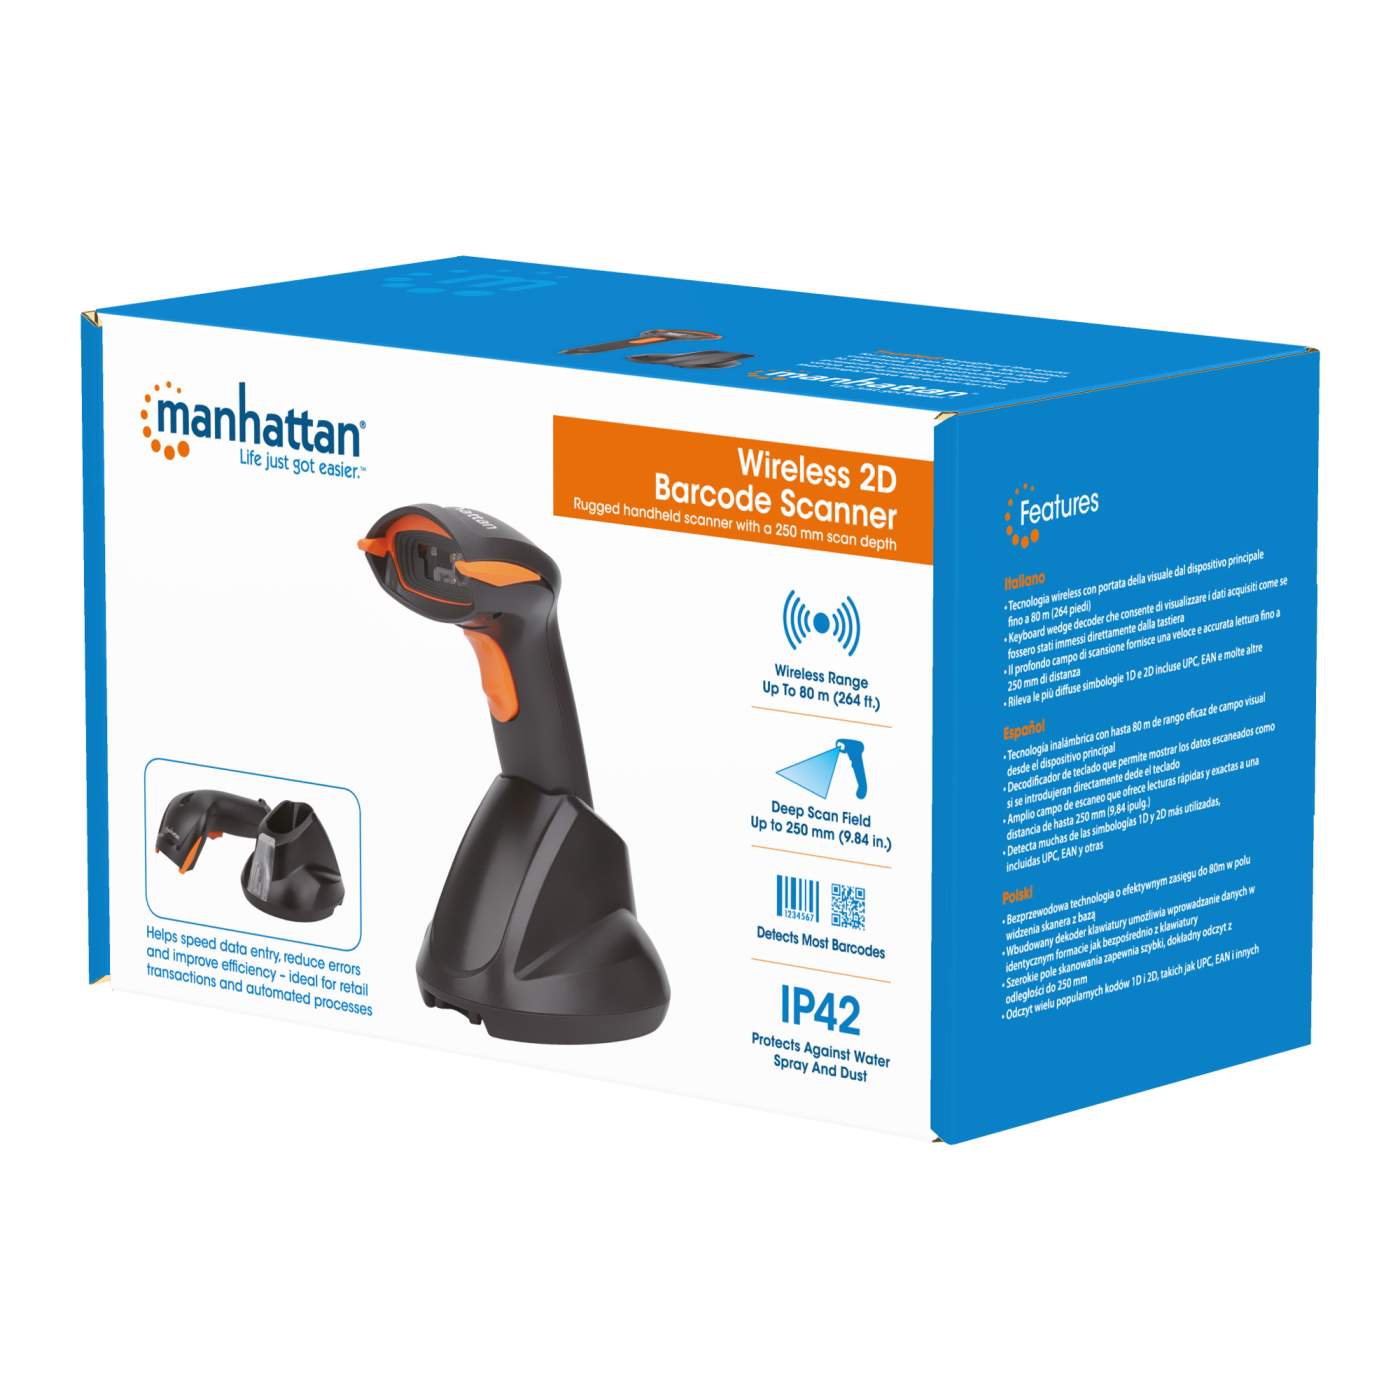 Wireless 2D CCD Barcode Scanner Packaging Image 2